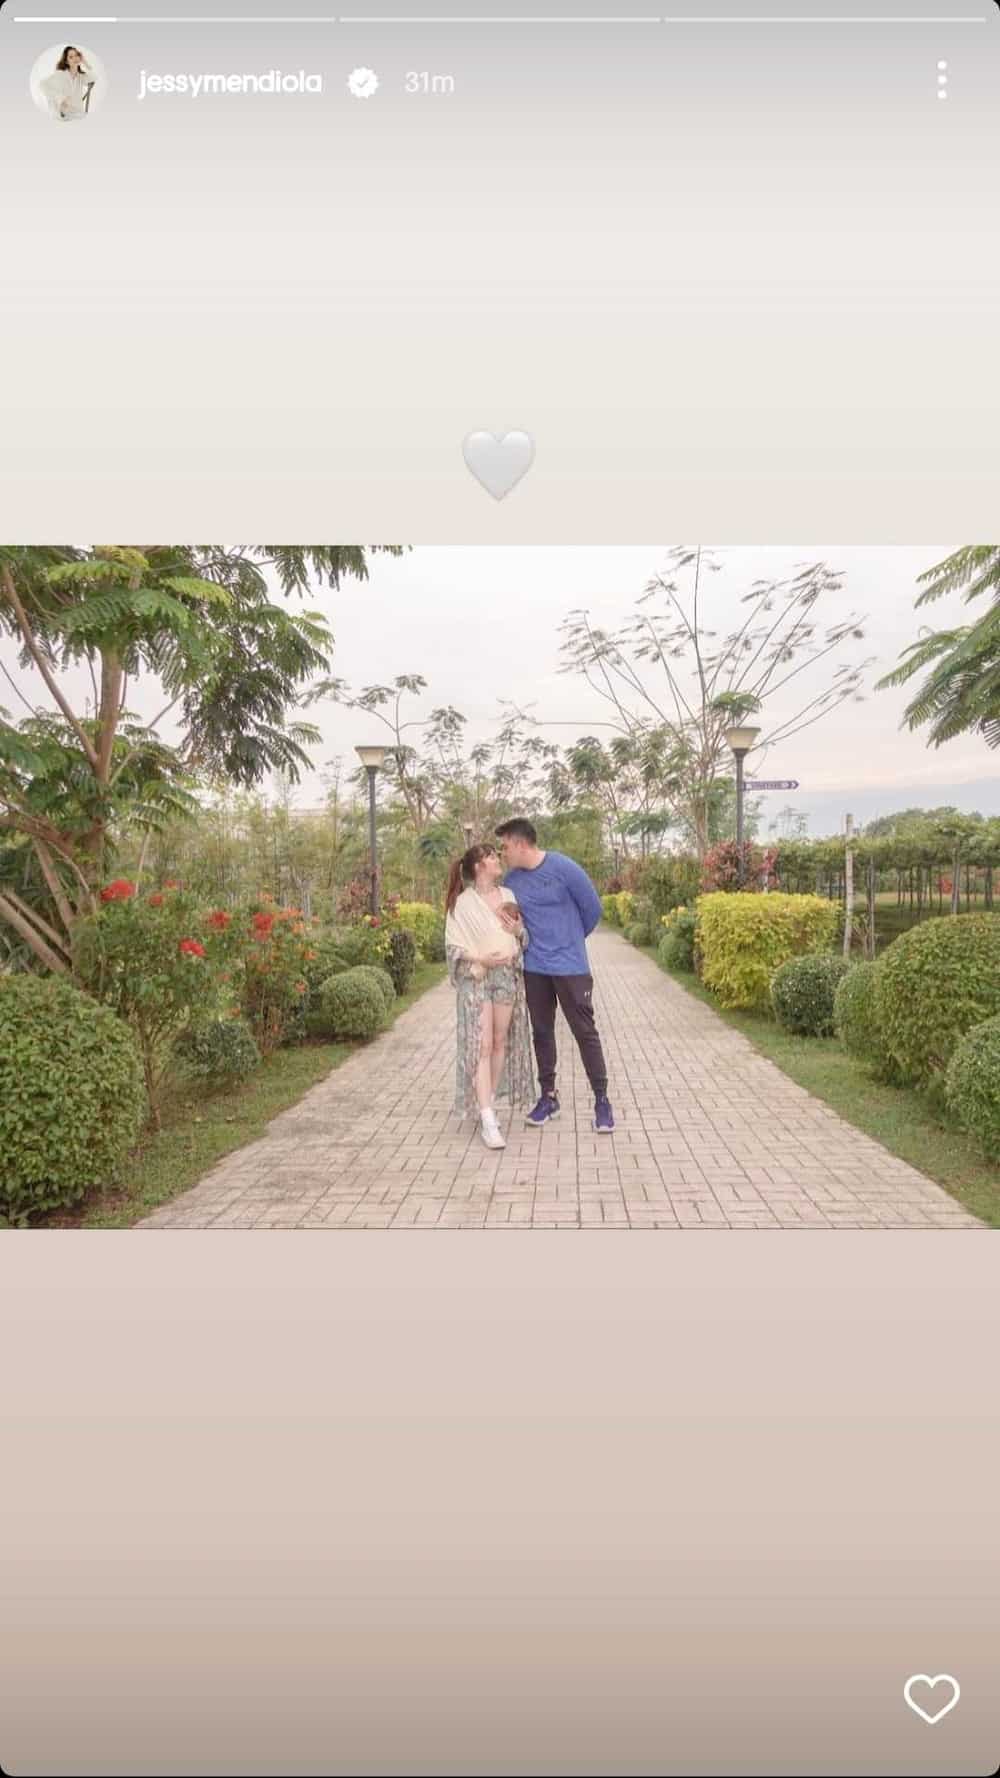 Jessy Mendiola posts new family photos with Luis Manzano and baby Isabella Rose